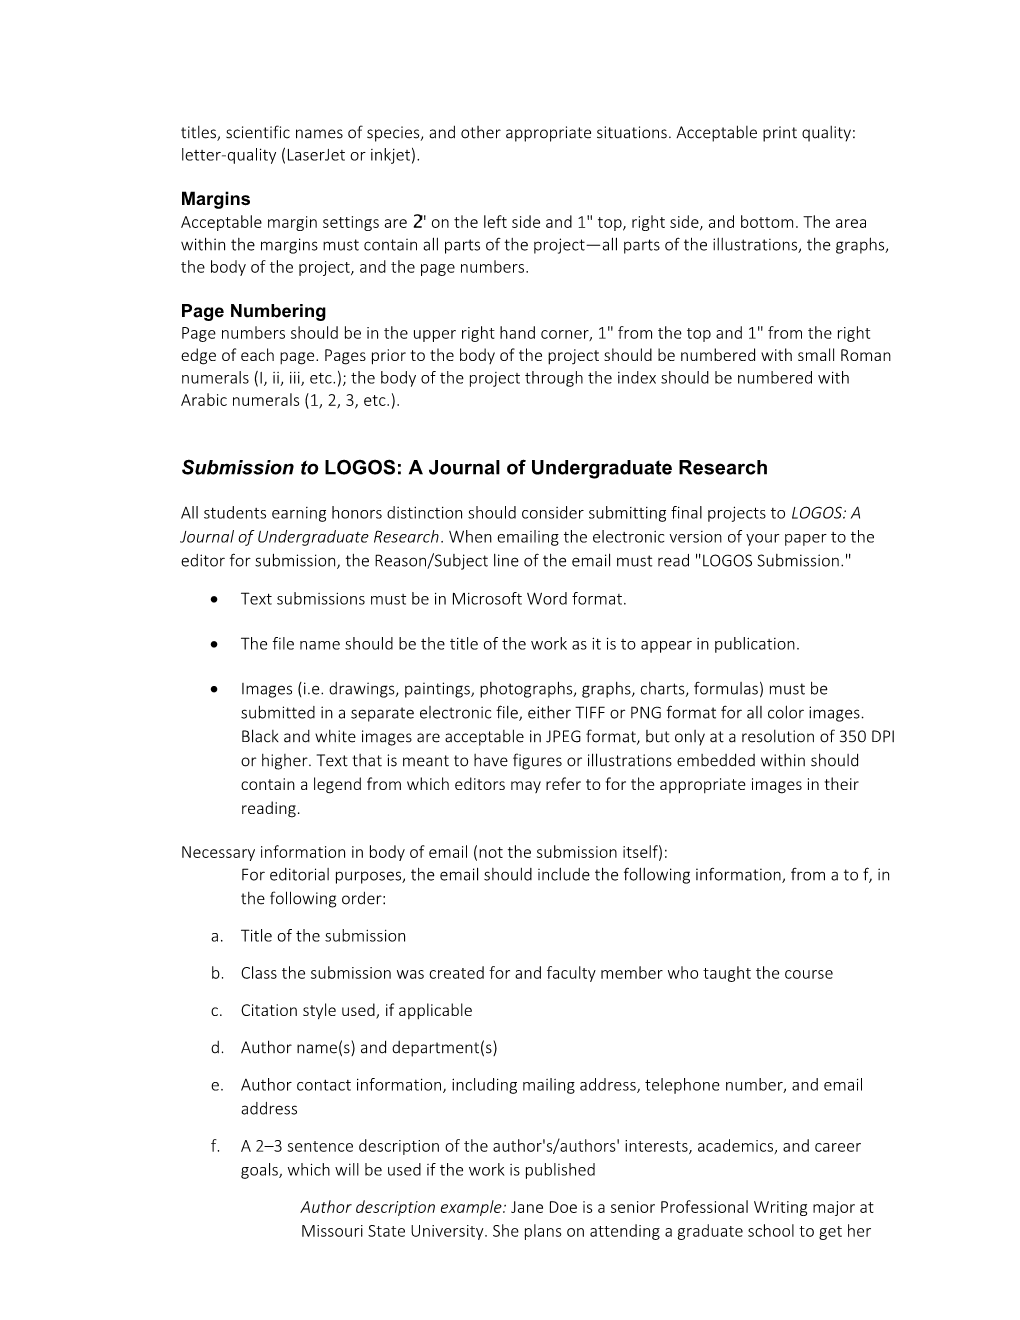 Distinction Project Submission Instructions